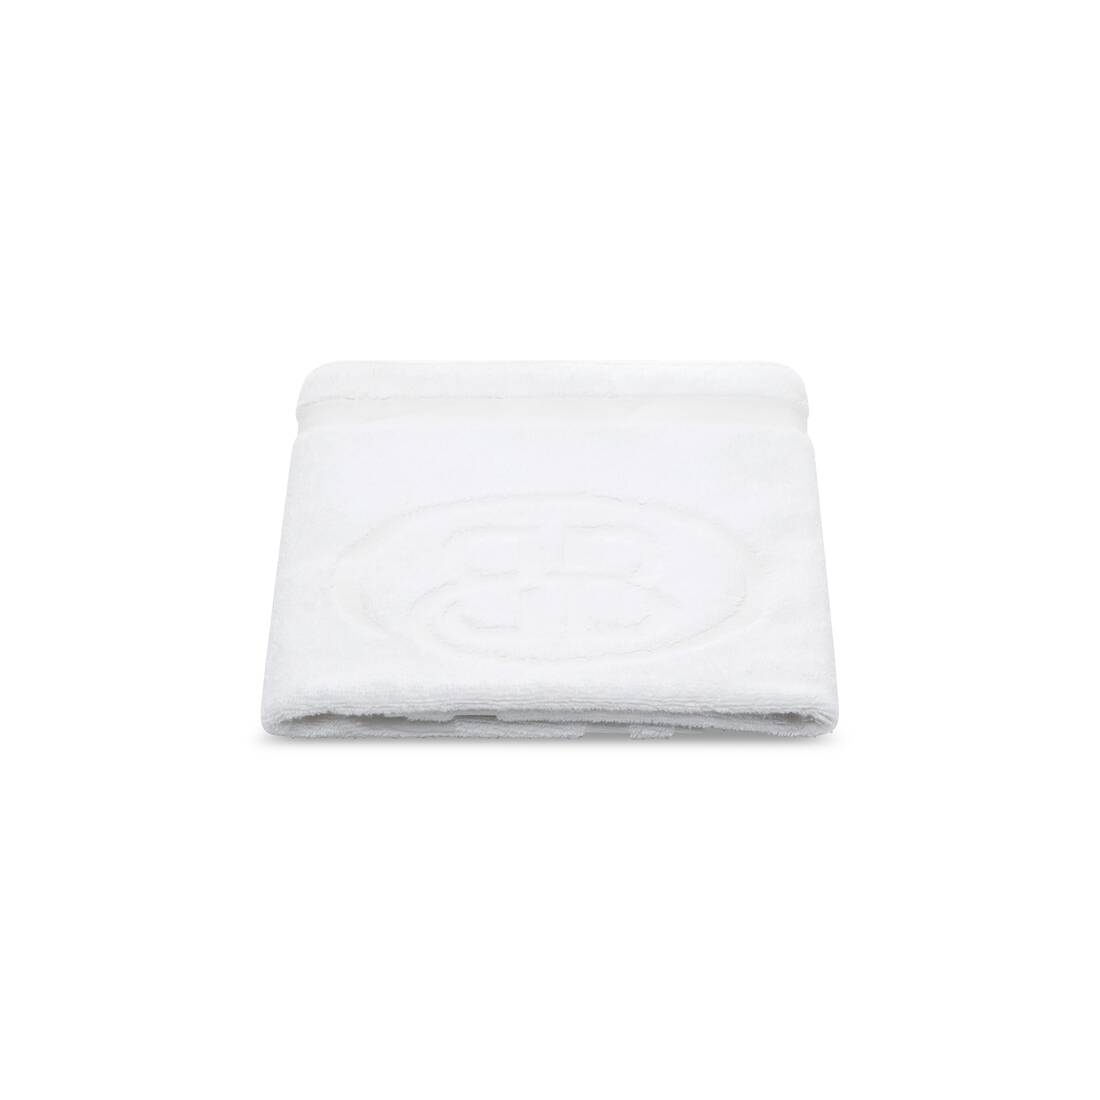 Hand Towel in White - 3